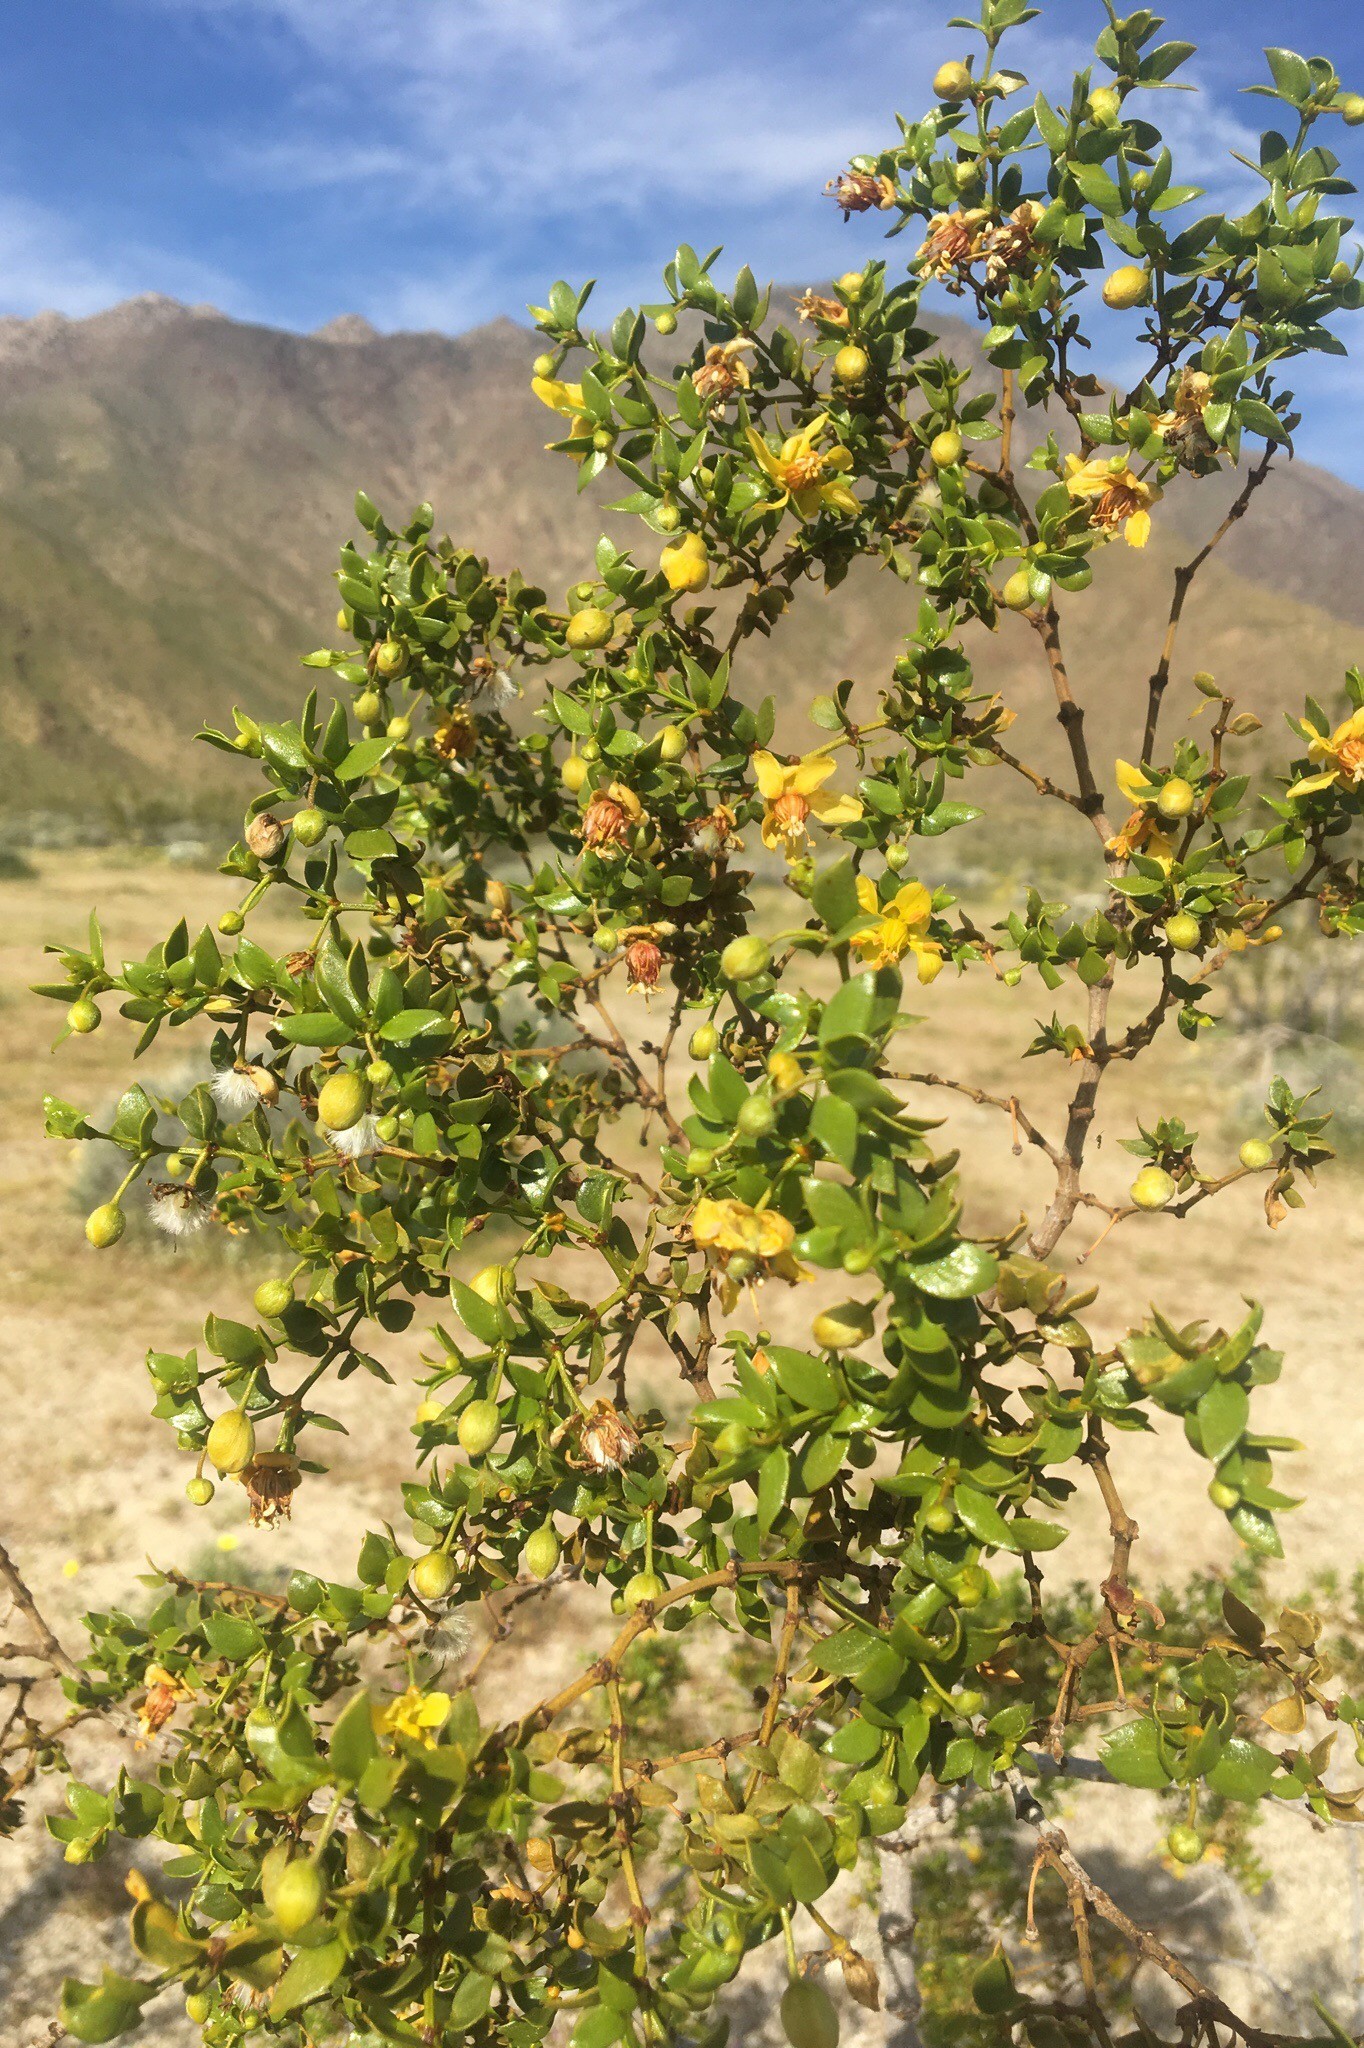 Plant with yellow flowers anza borrego